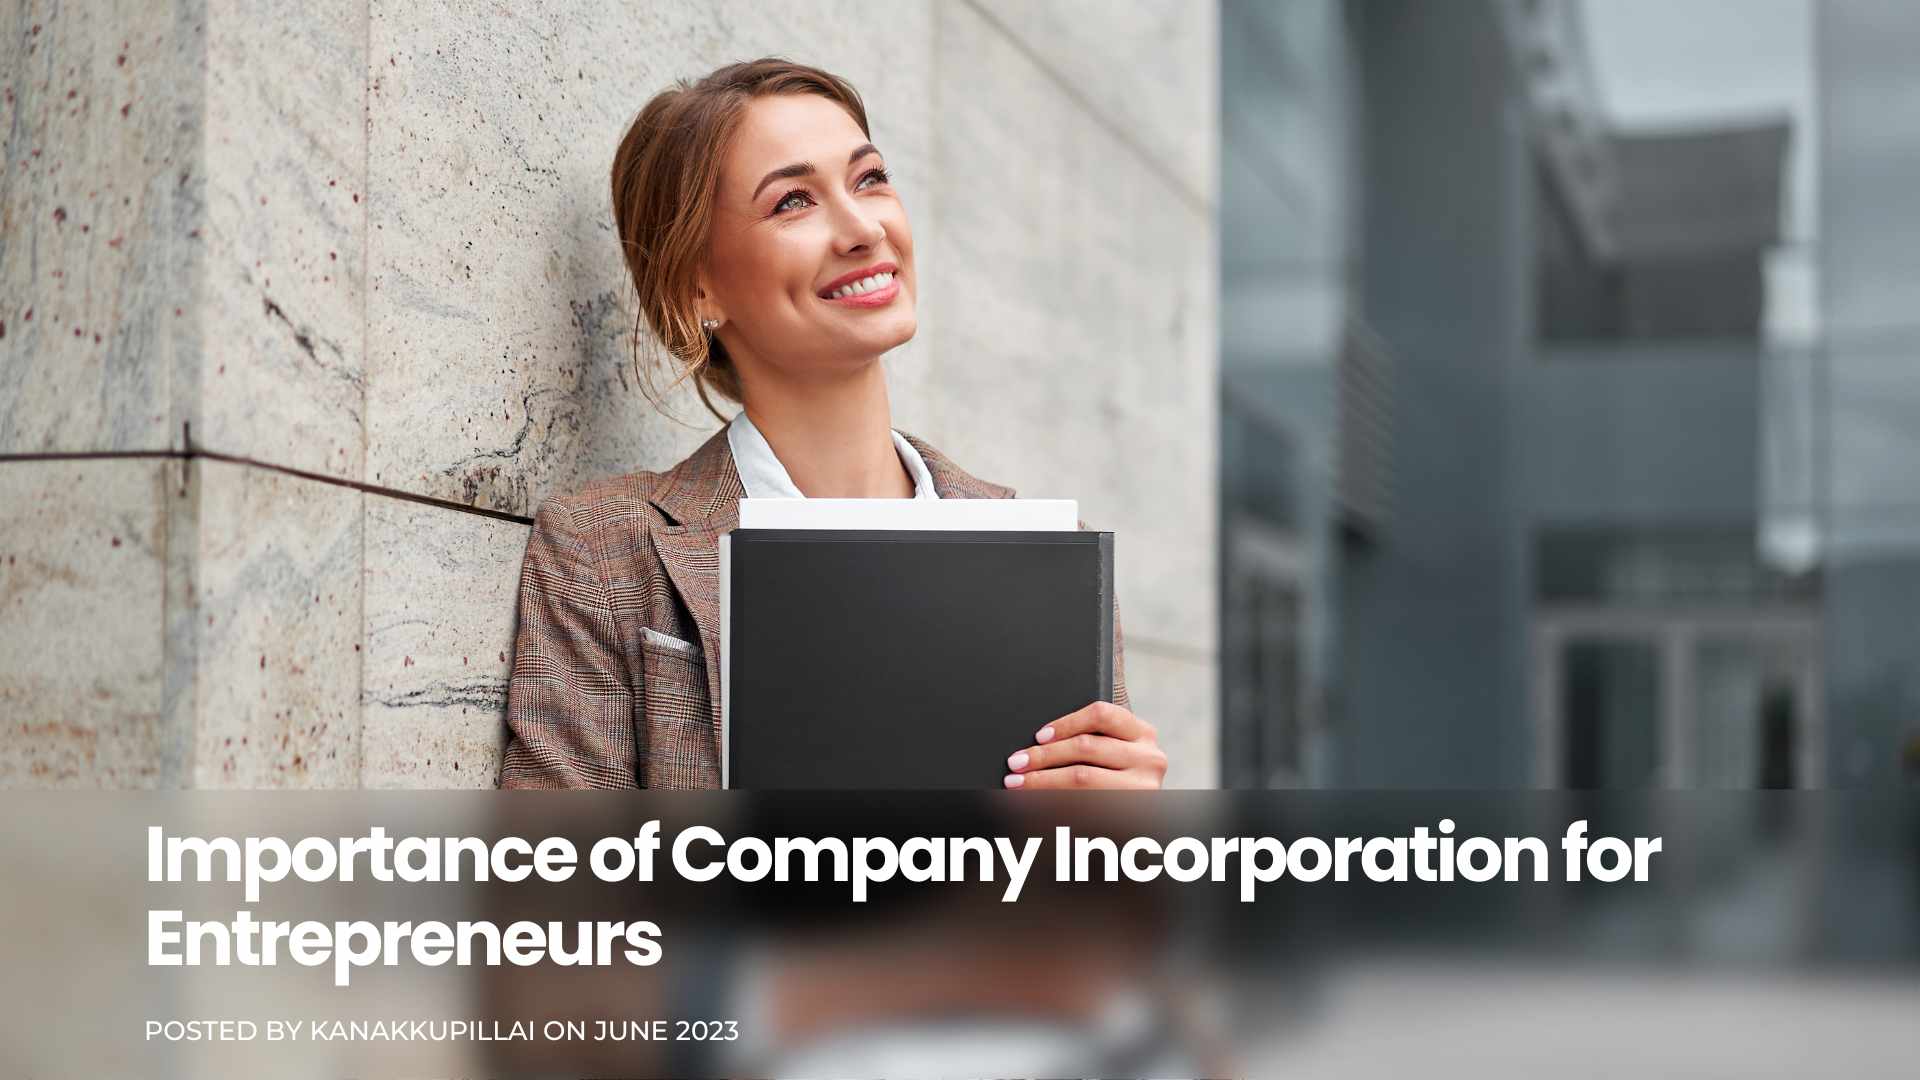 You are currently viewing The Importance of Company Incorporation in Bangalore for Entrepreneurs